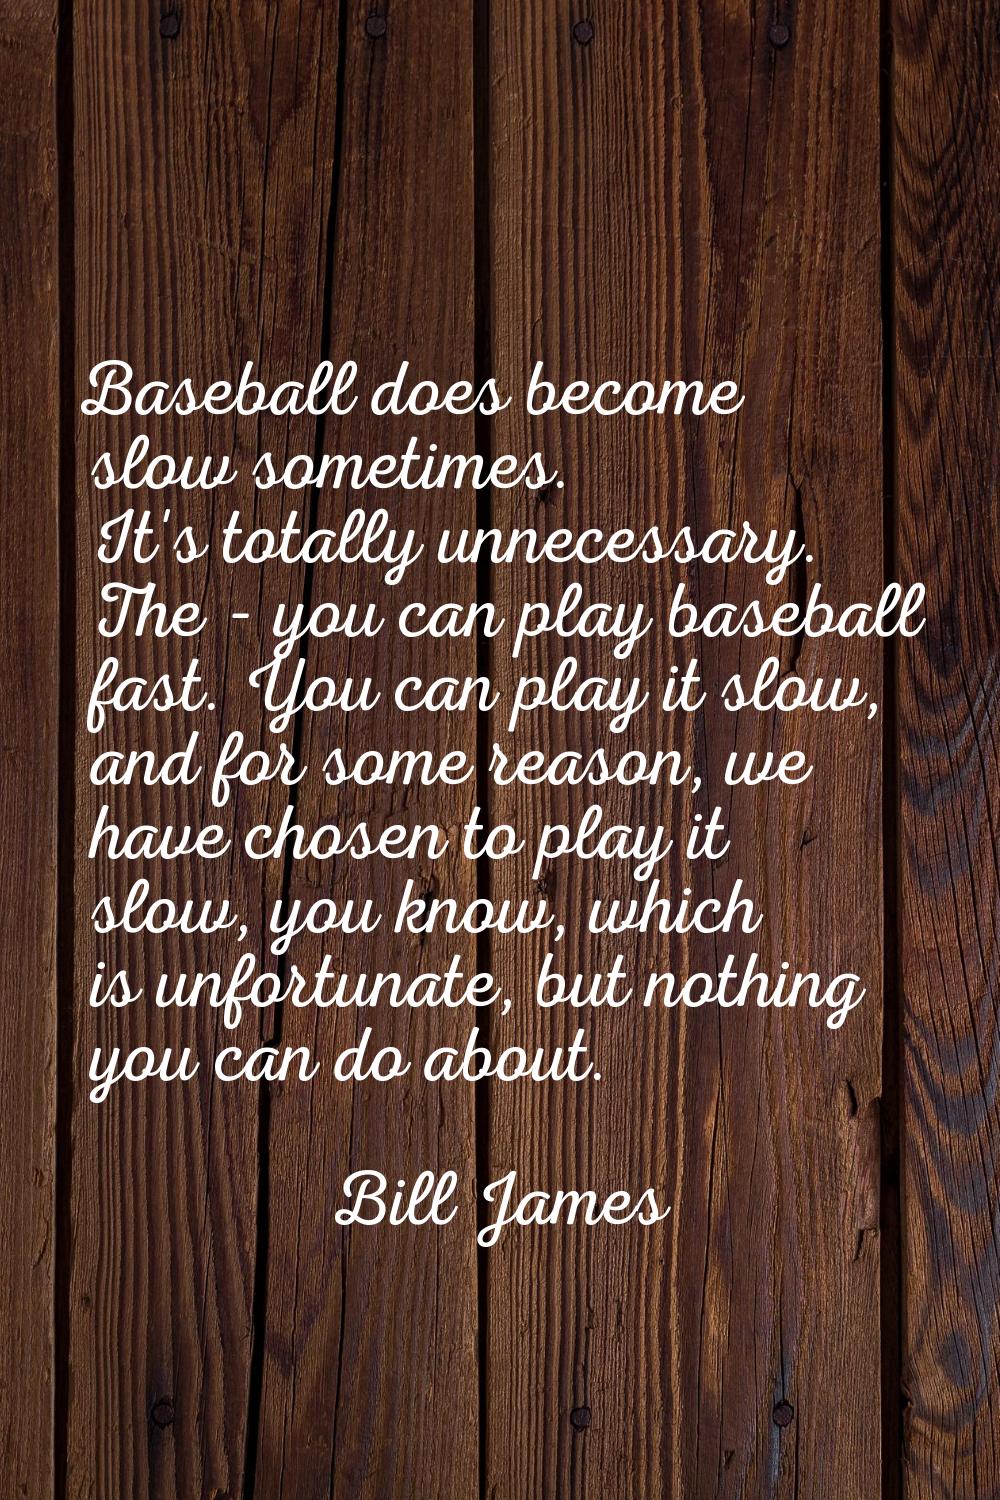 Baseball does become slow sometimes. It's totally unnecessary. The - you can play baseball fast. Yo